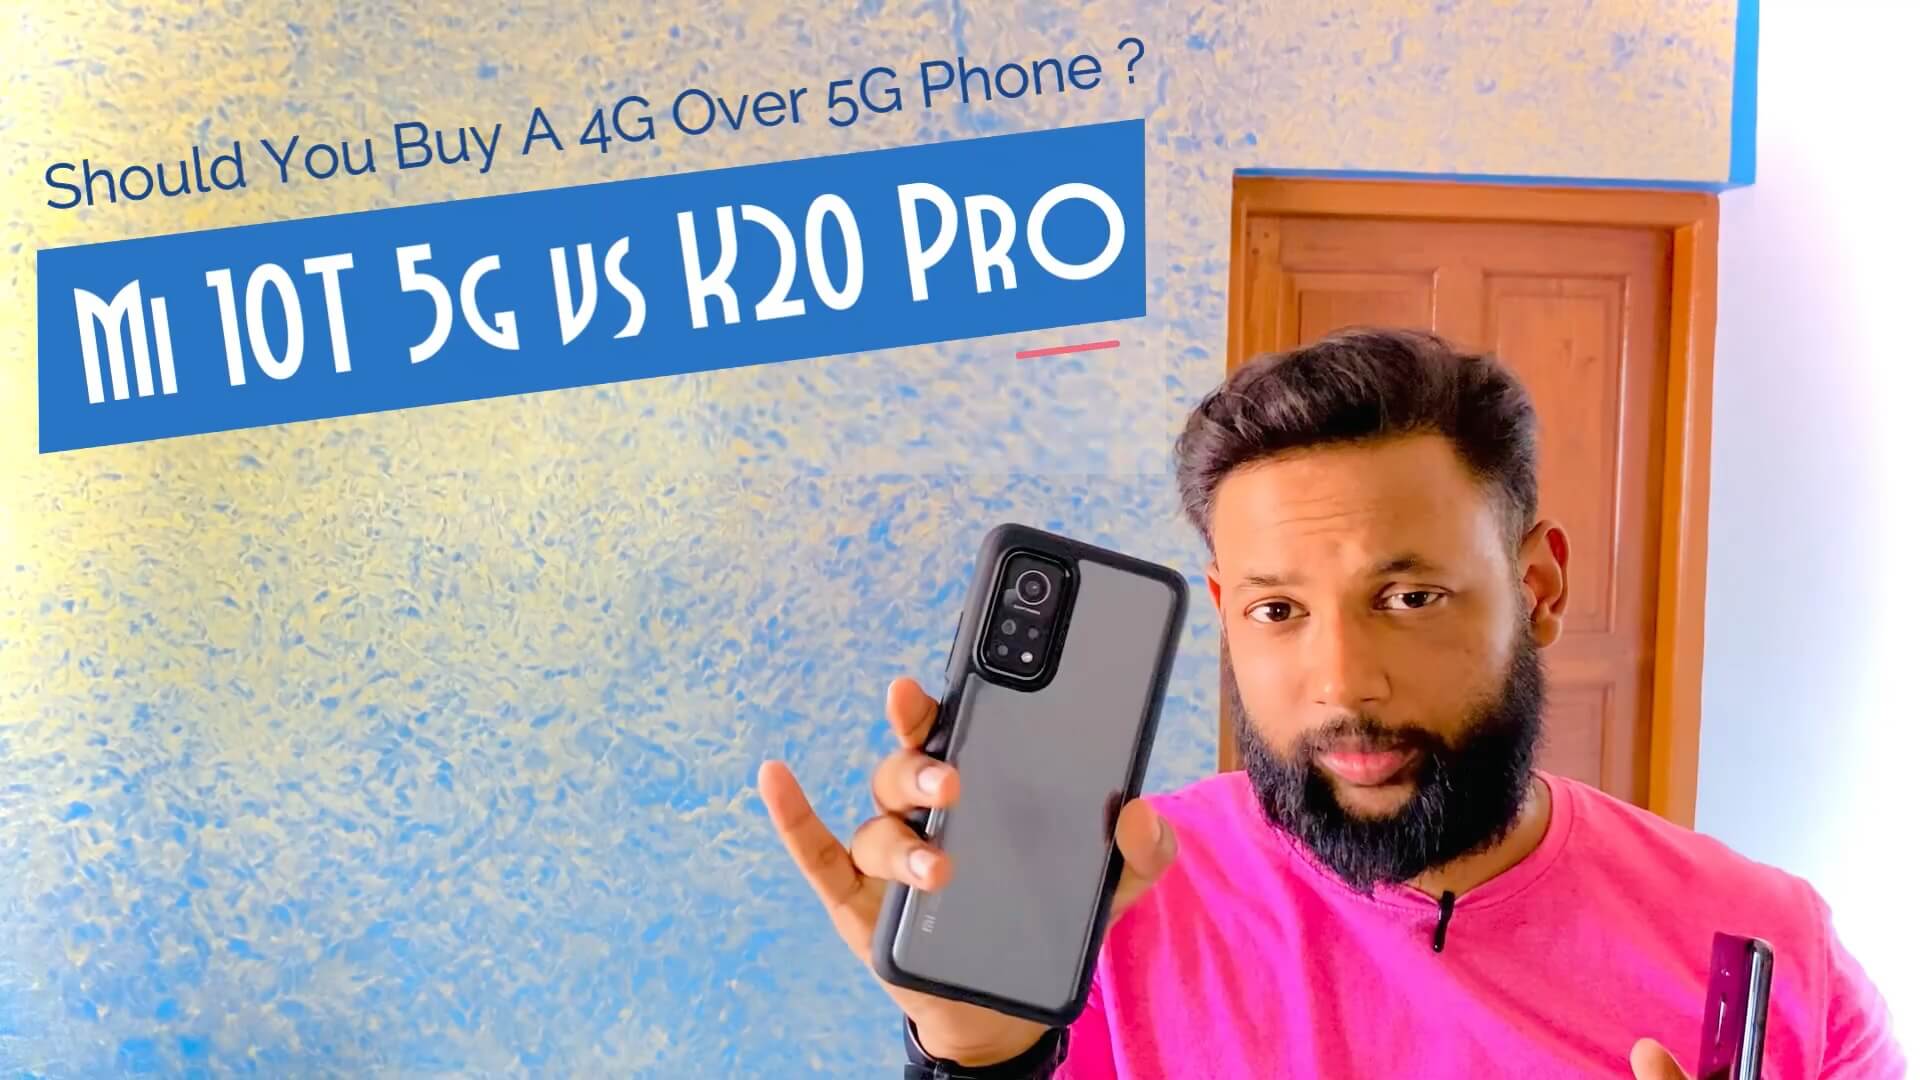 Should You Buy A 4G Phone Over 5G Phone In 2021? Comparison Between